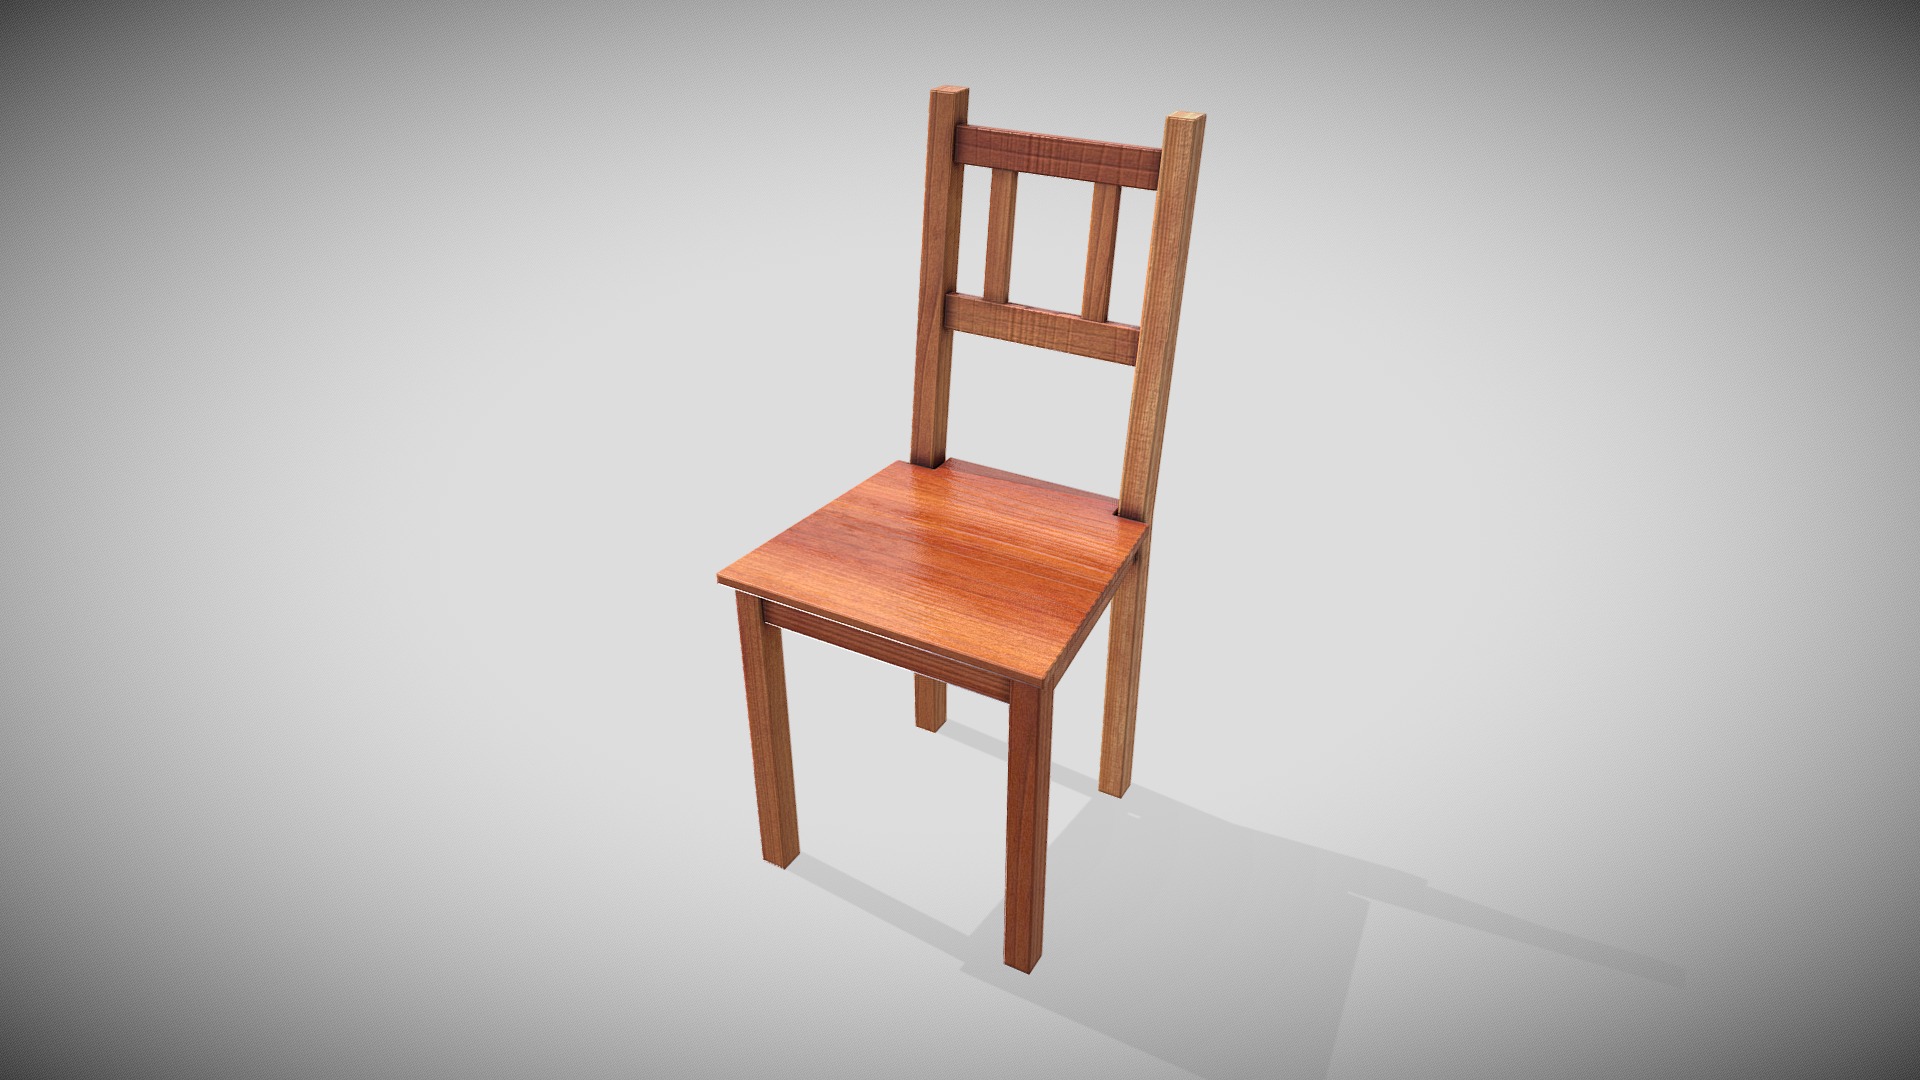 3D model Low Poly Basic Dining Chair - This is a 3D model of the Low Poly Basic Dining Chair. The 3D model is about a wooden chair on a white surface.